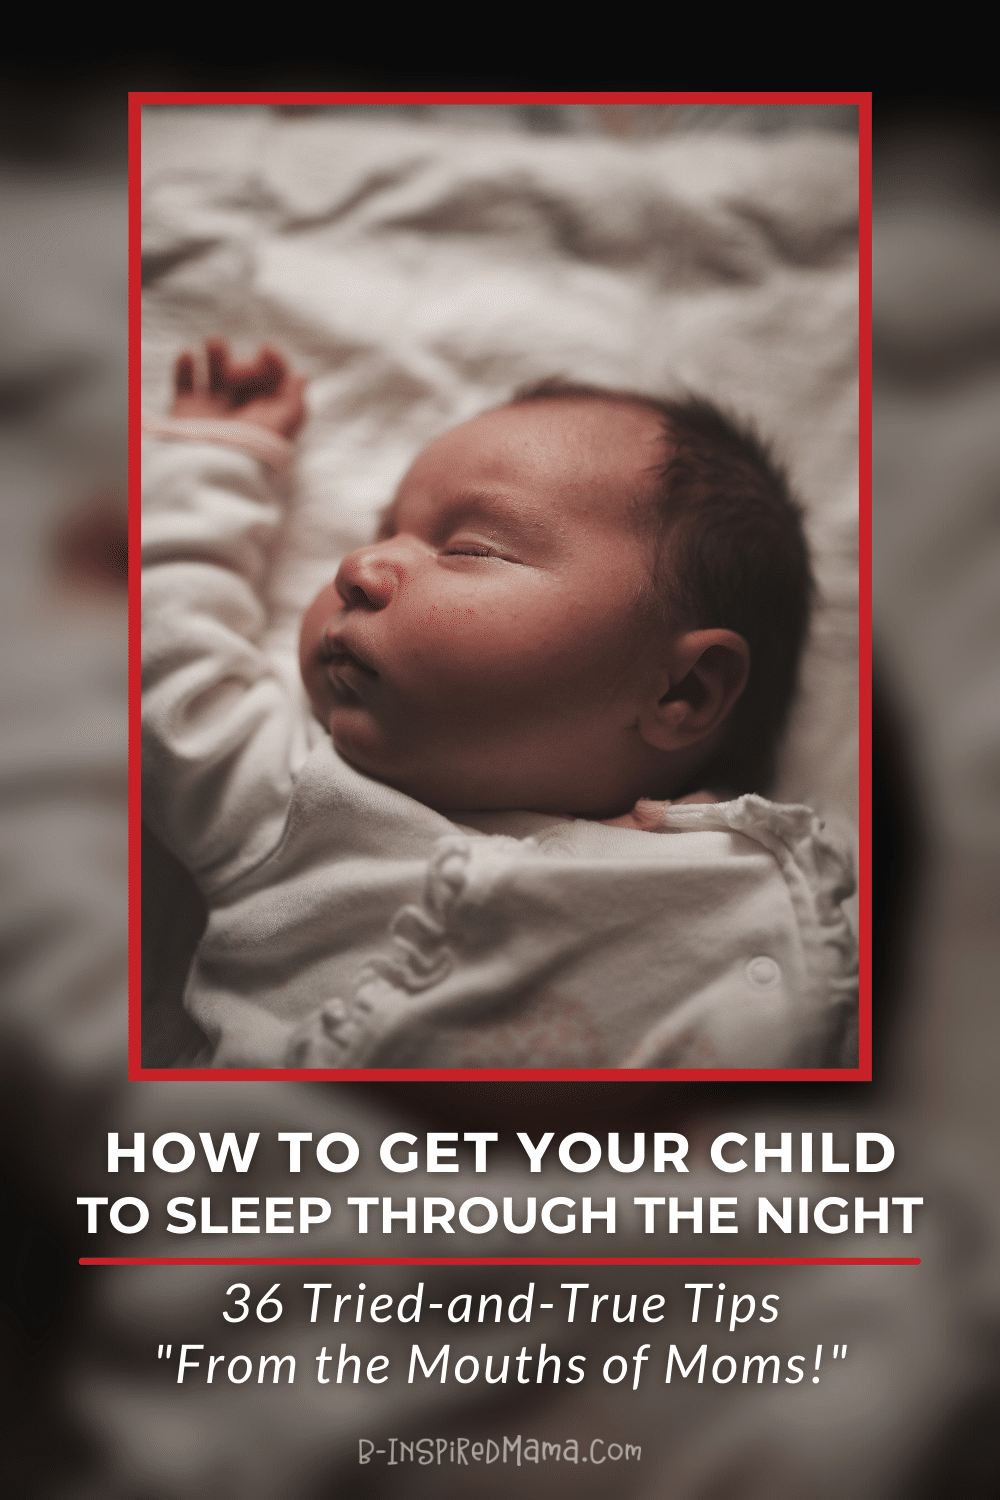 A photo of an infant sleeping with their head turned to the left and their arm up along their face. Title reads "How to Get Your Child to Sleep Through the Night: 36 Tried-and-Tested Tips 'From the Mouths of Moms'".